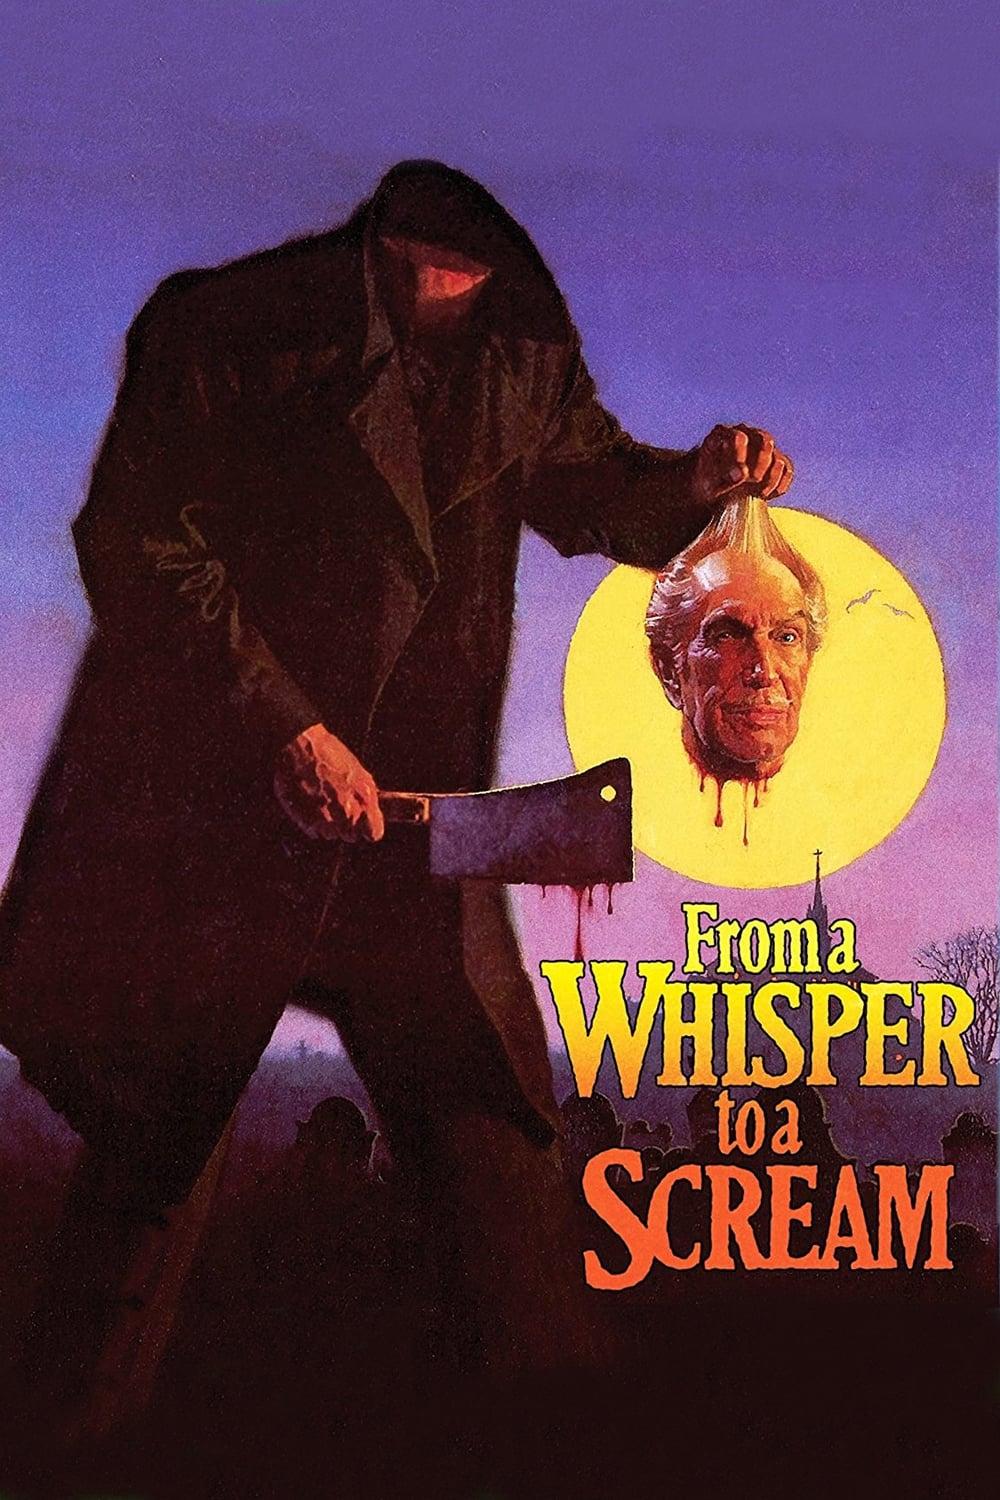 From a Whisper to a Scream poster